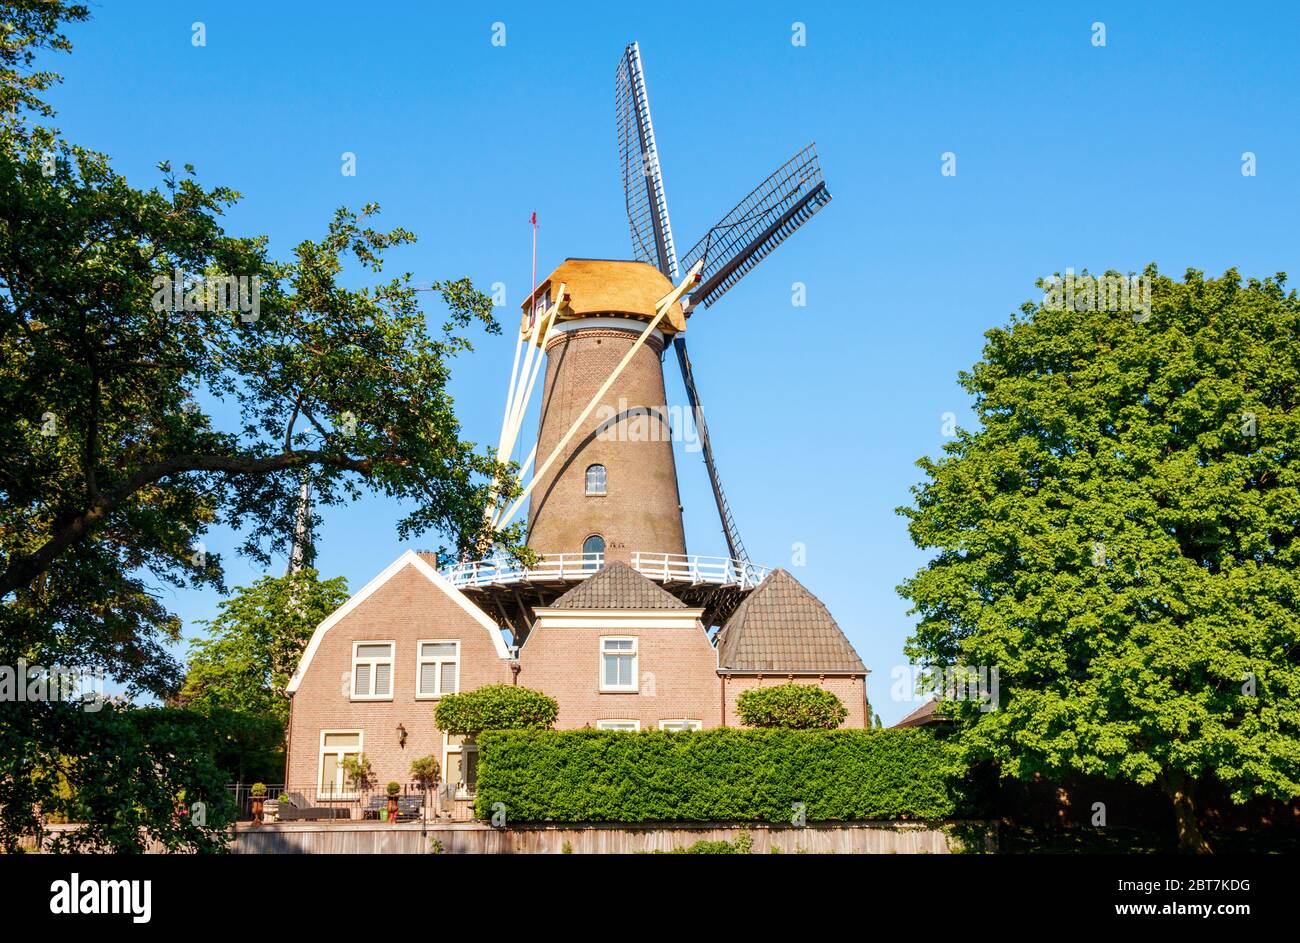 Windmill De Hoop (The Hope) also called 't Jach and three houses on a sunny afternoon against a blue sky. Culemborg, Gelderland, The Netherlands. Stock Photo